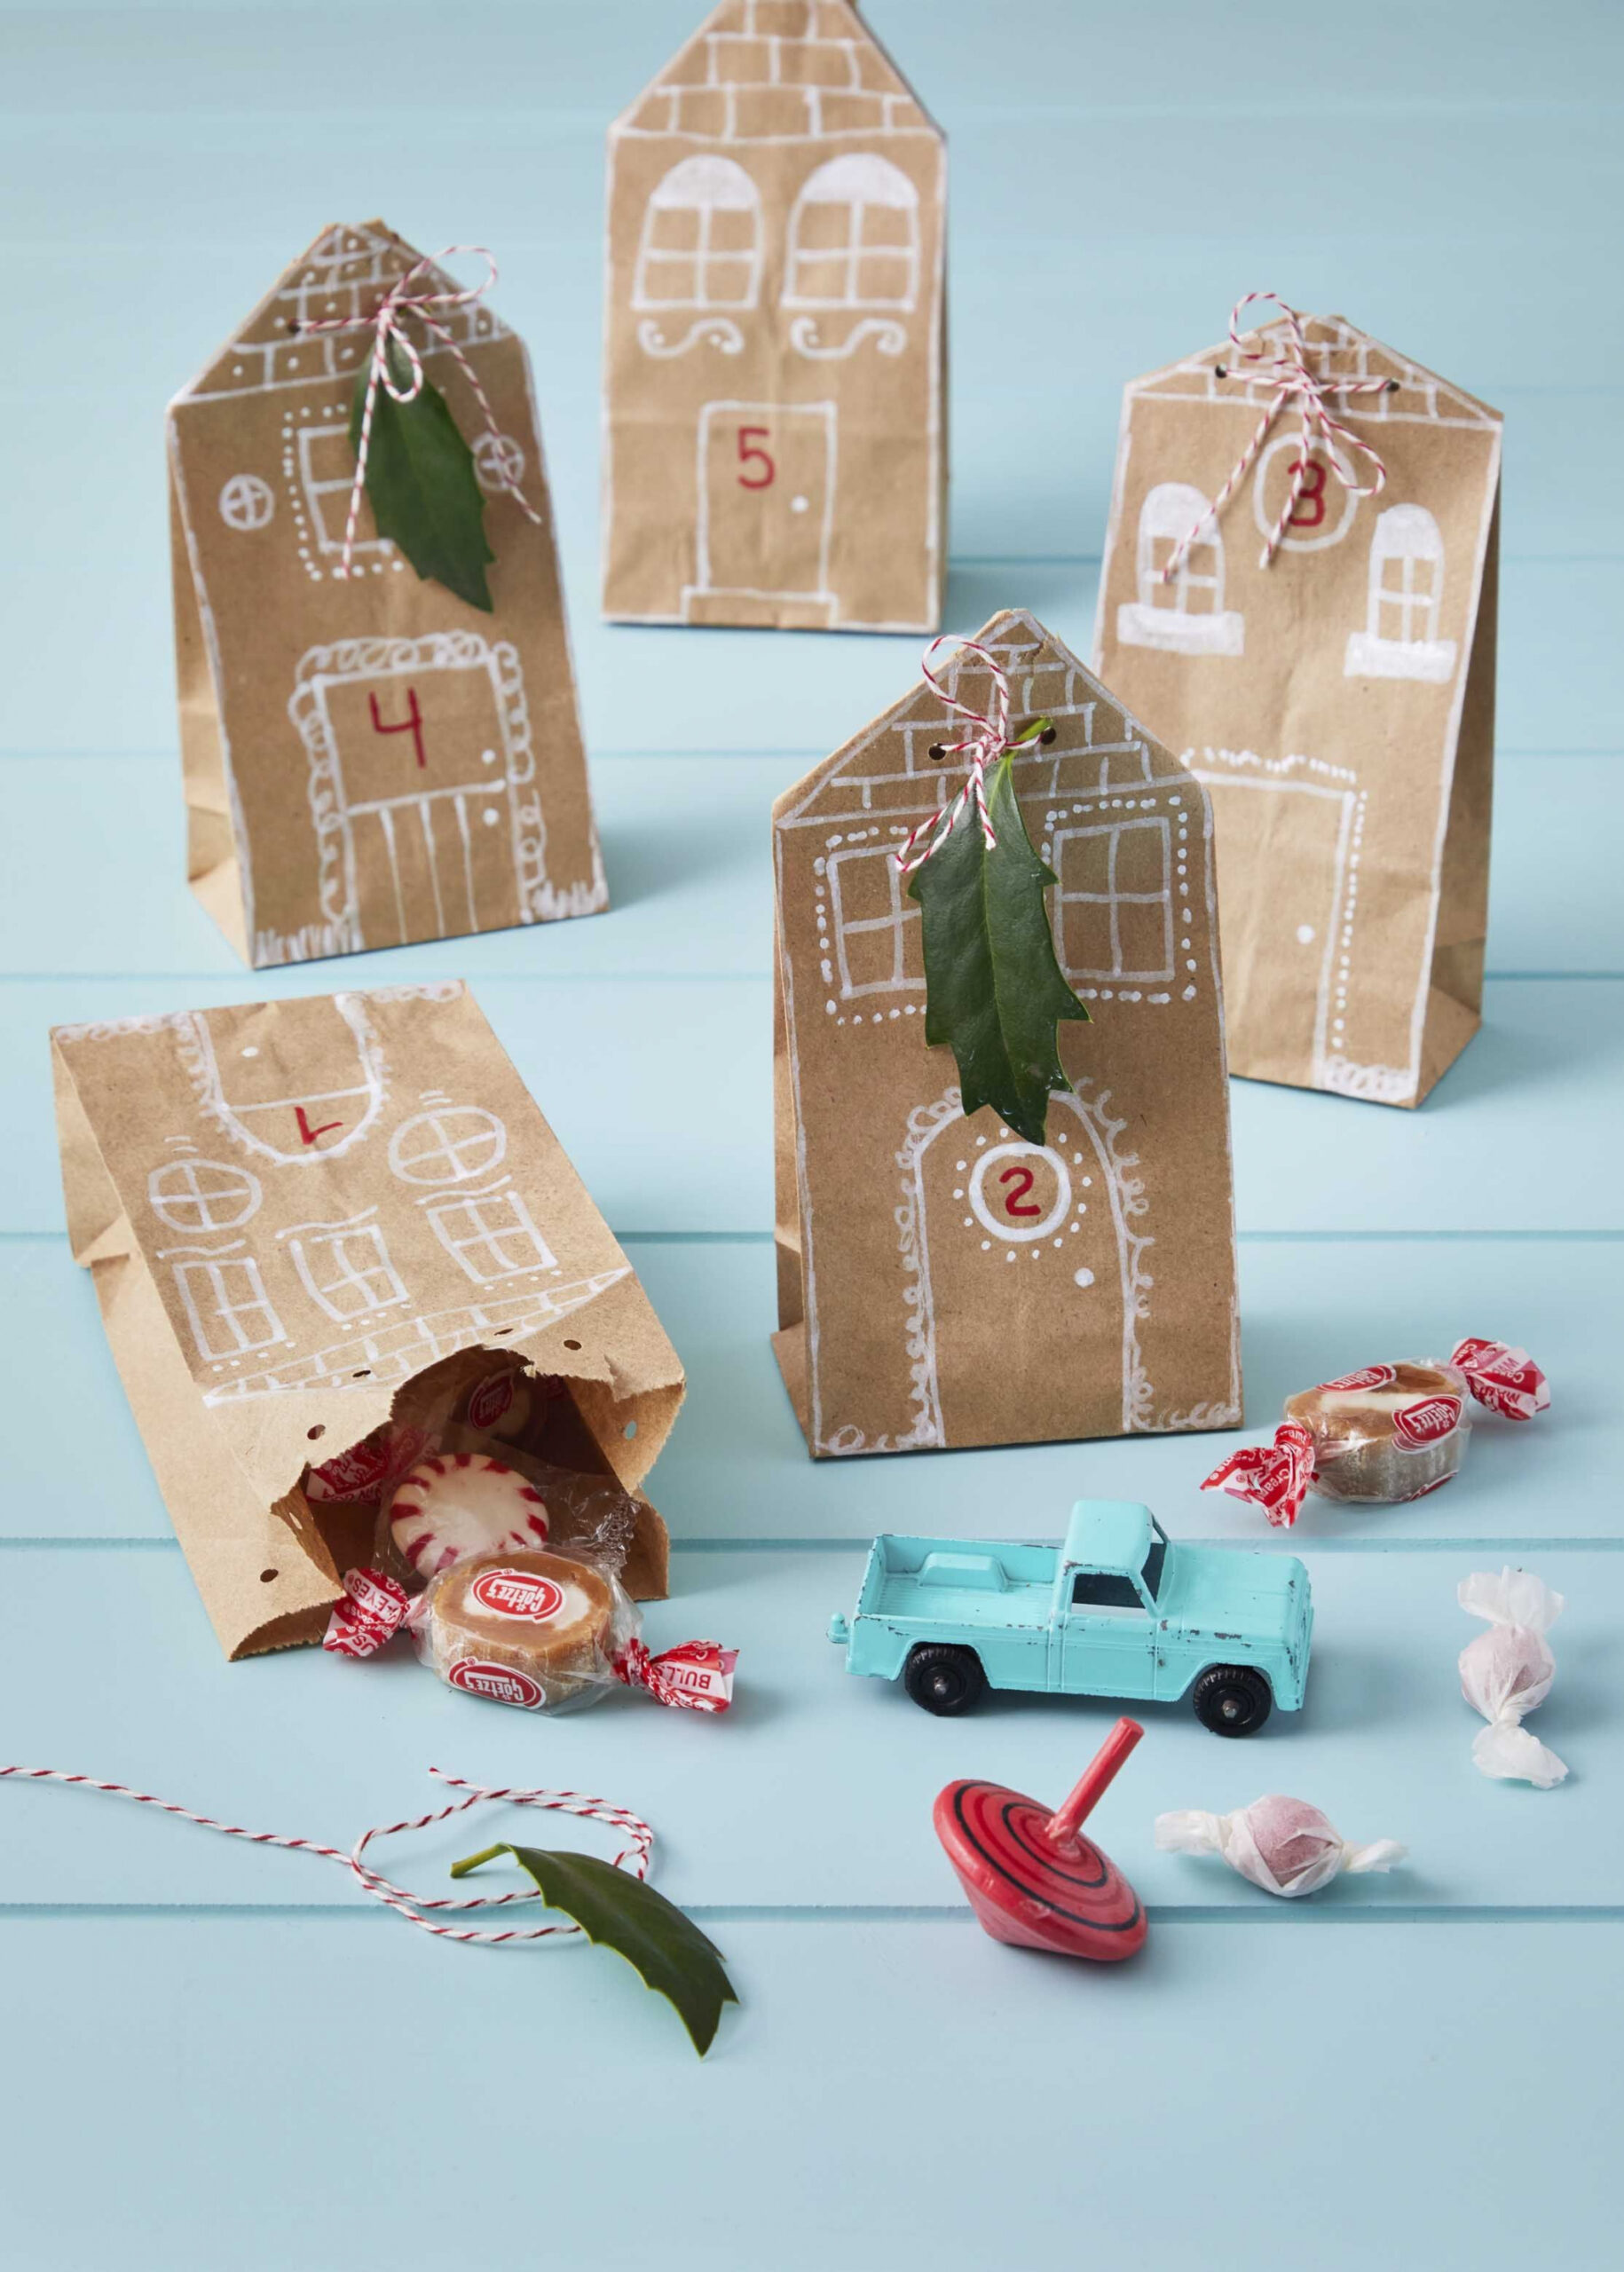 Easy DIY Christmas Crafts for Adults to Make in